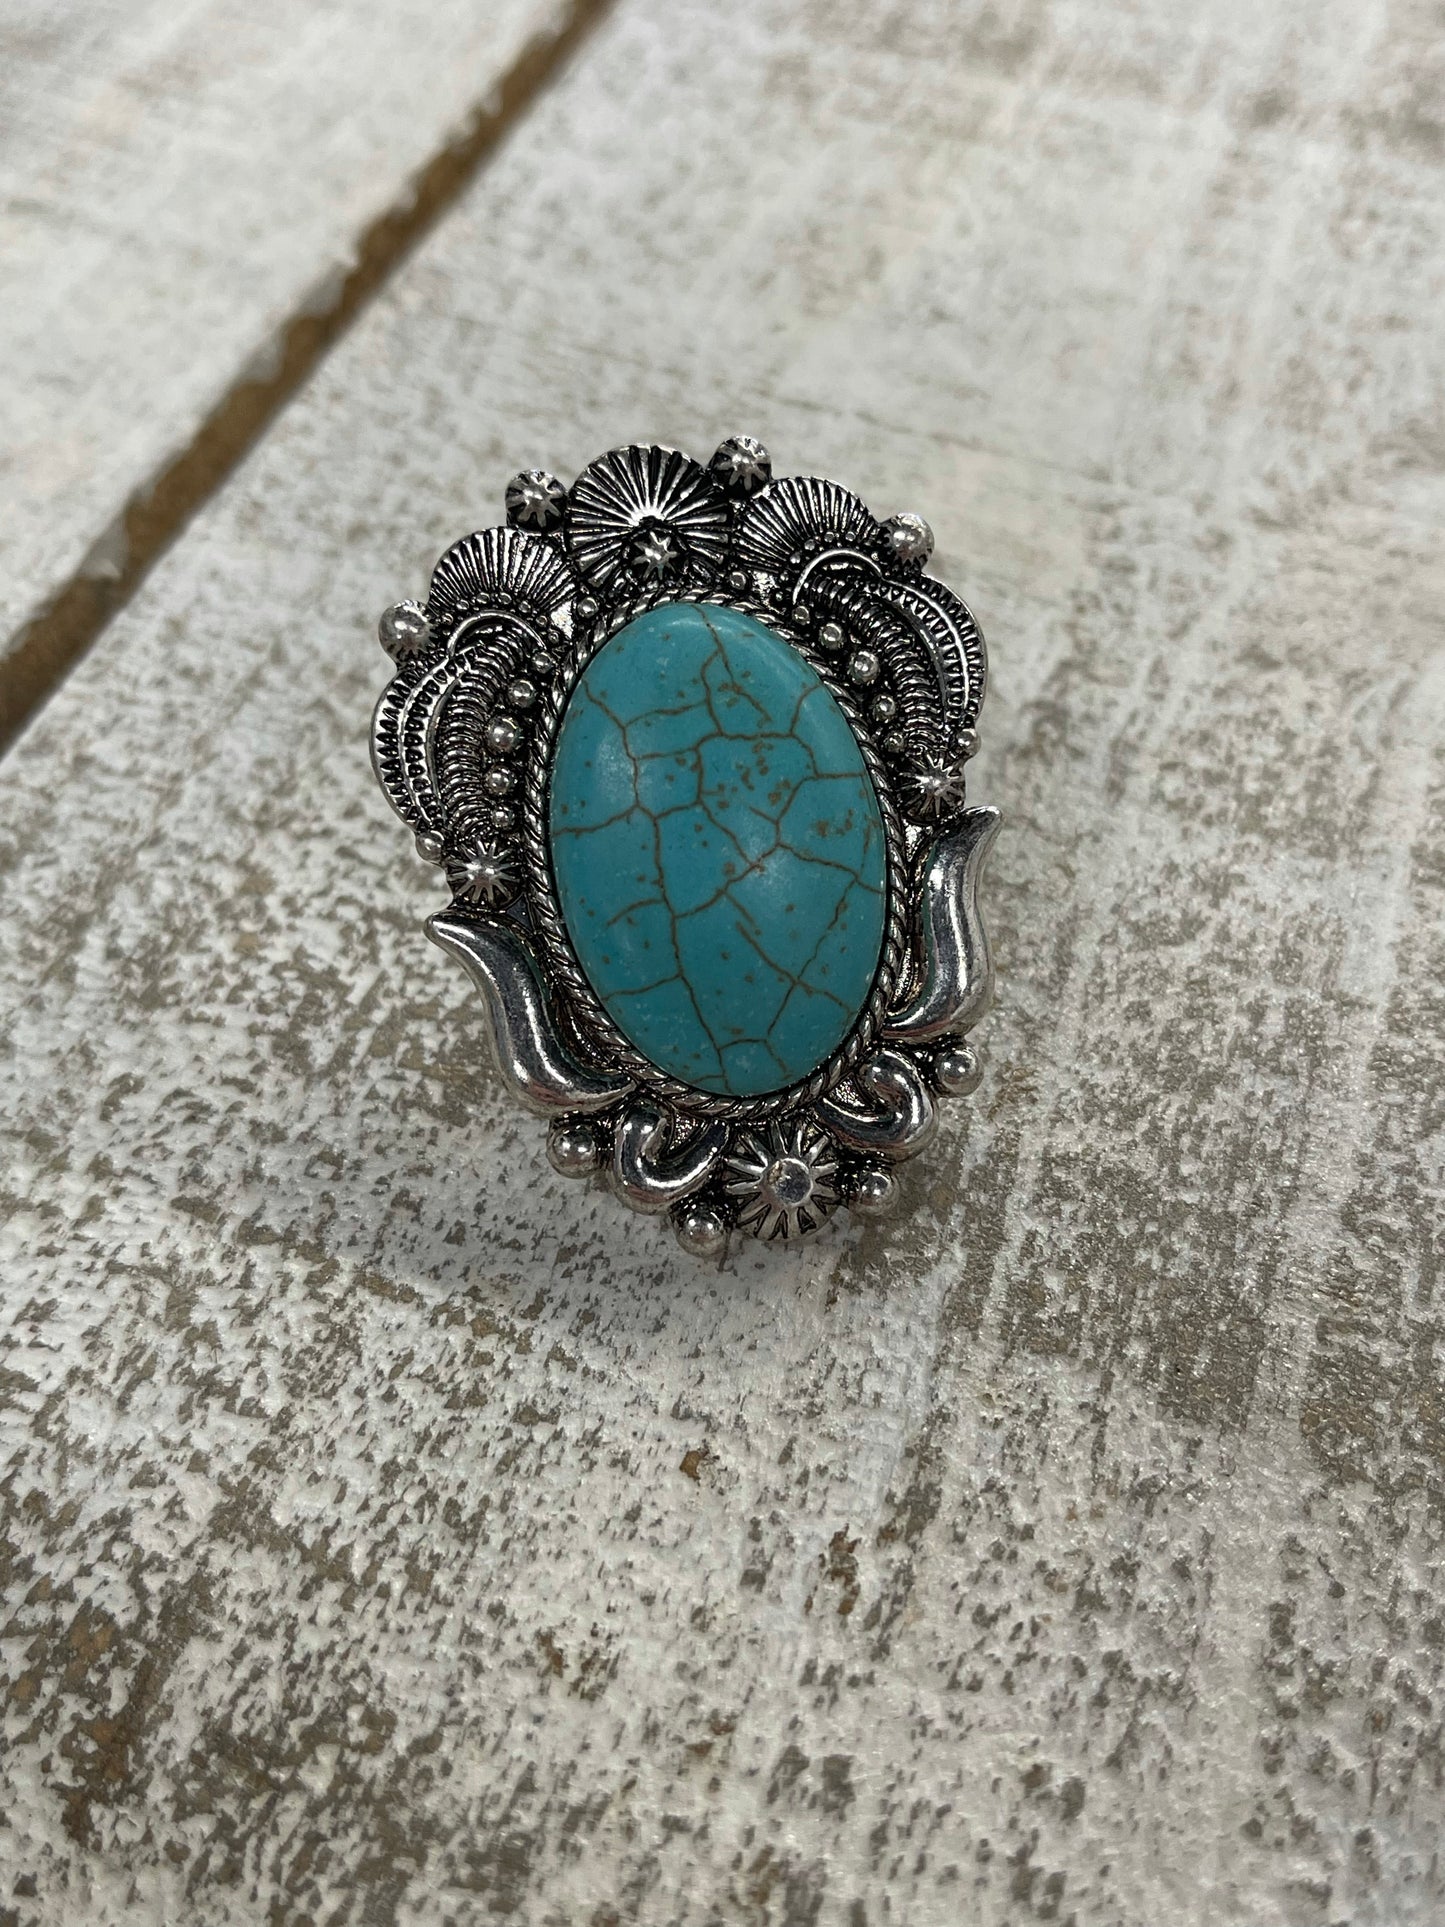 The Tuscon Turquoise Ring